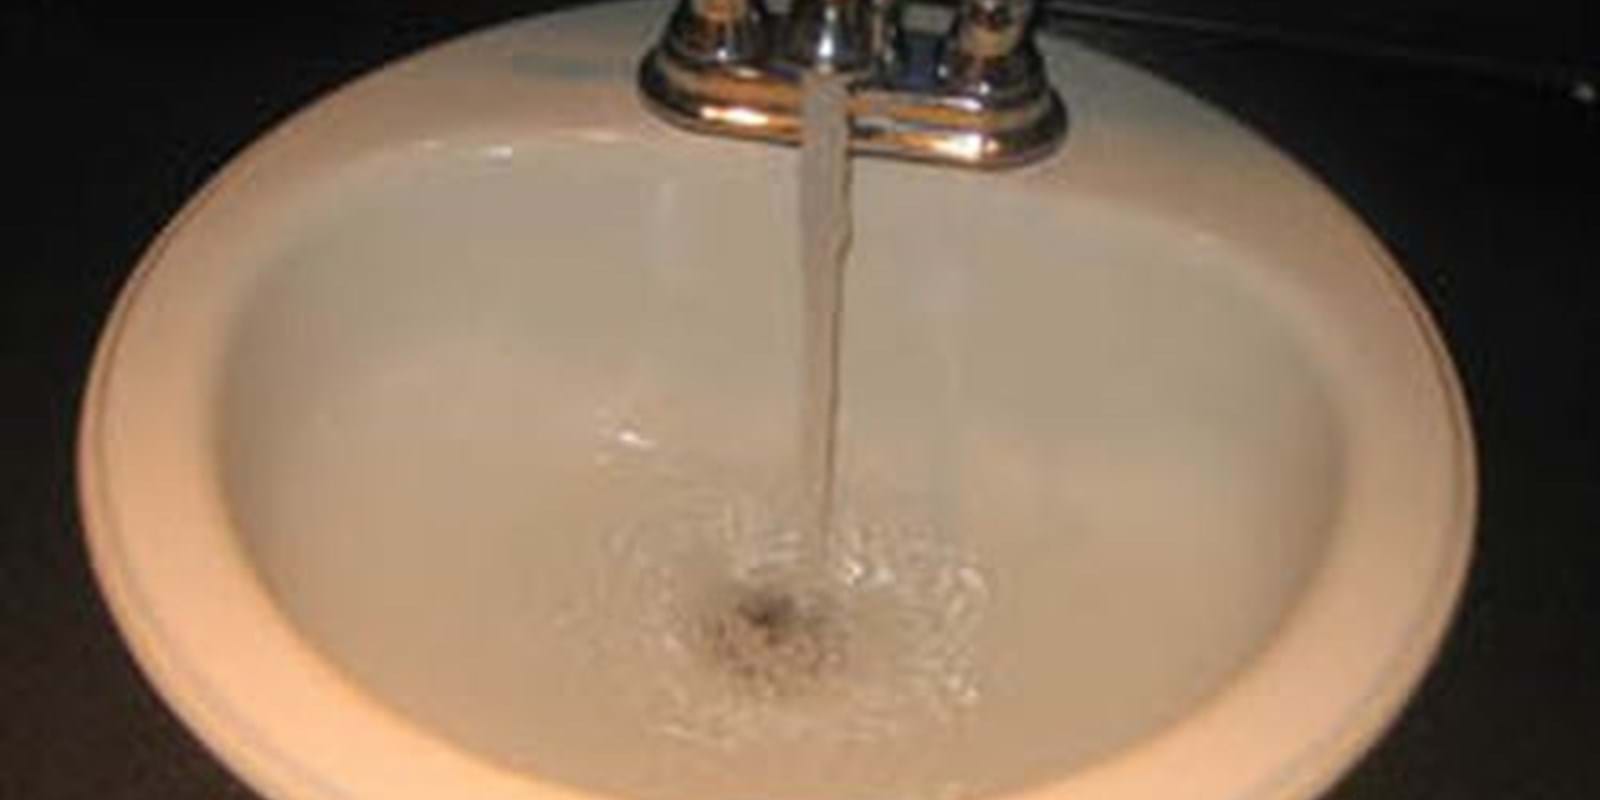 How to Supplement the Water Supply in Your Home